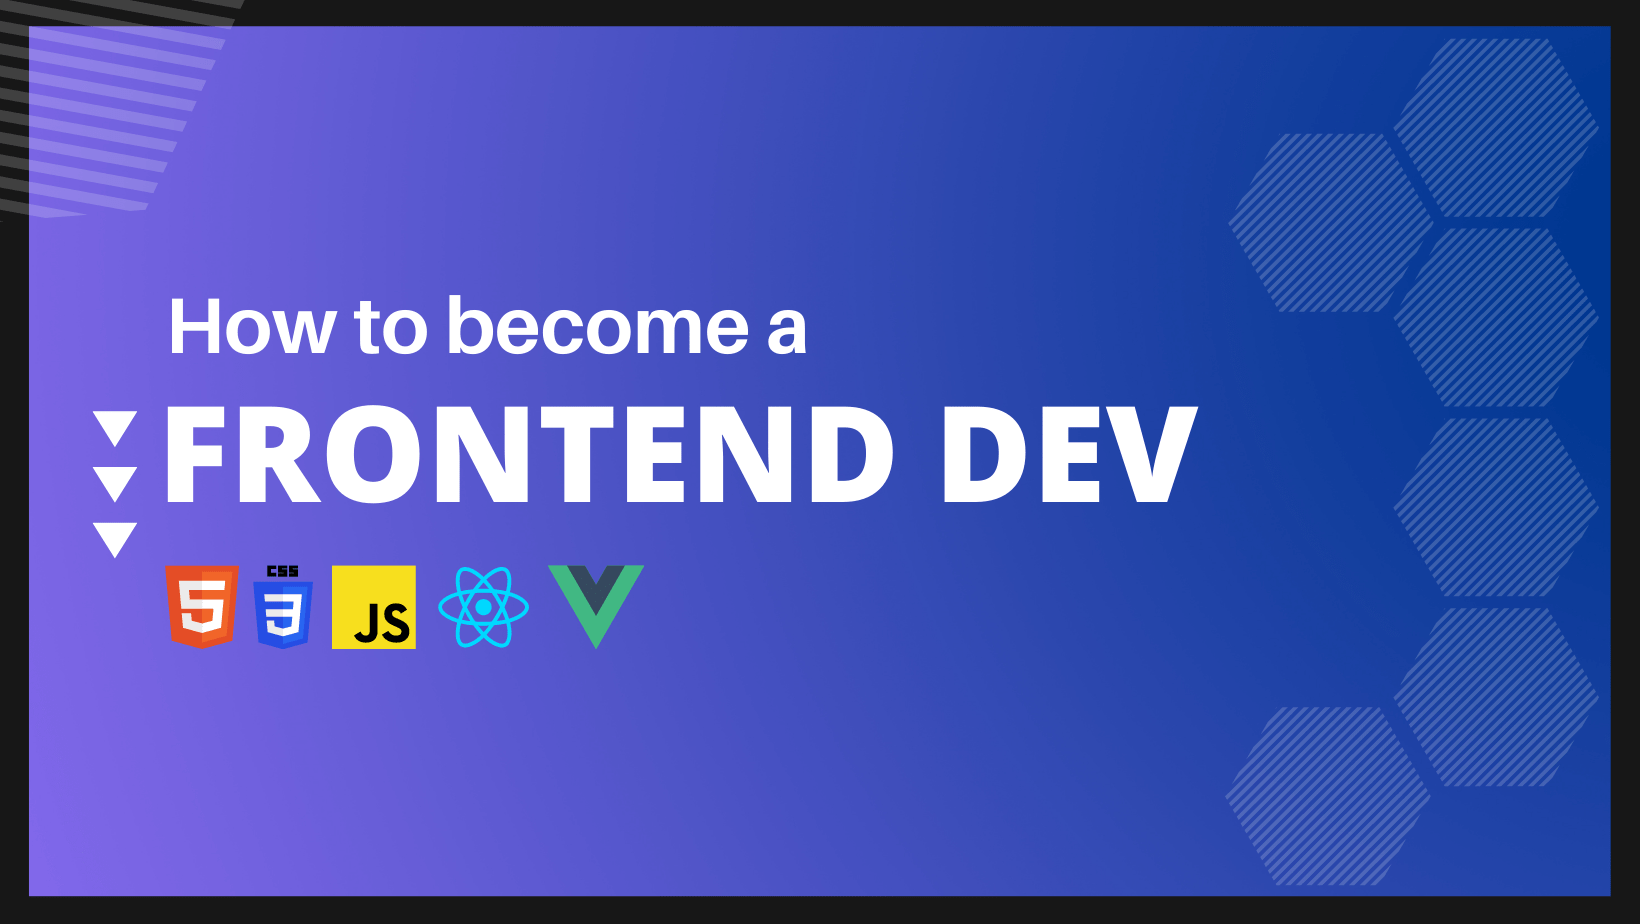 How to become a Frontend Developer